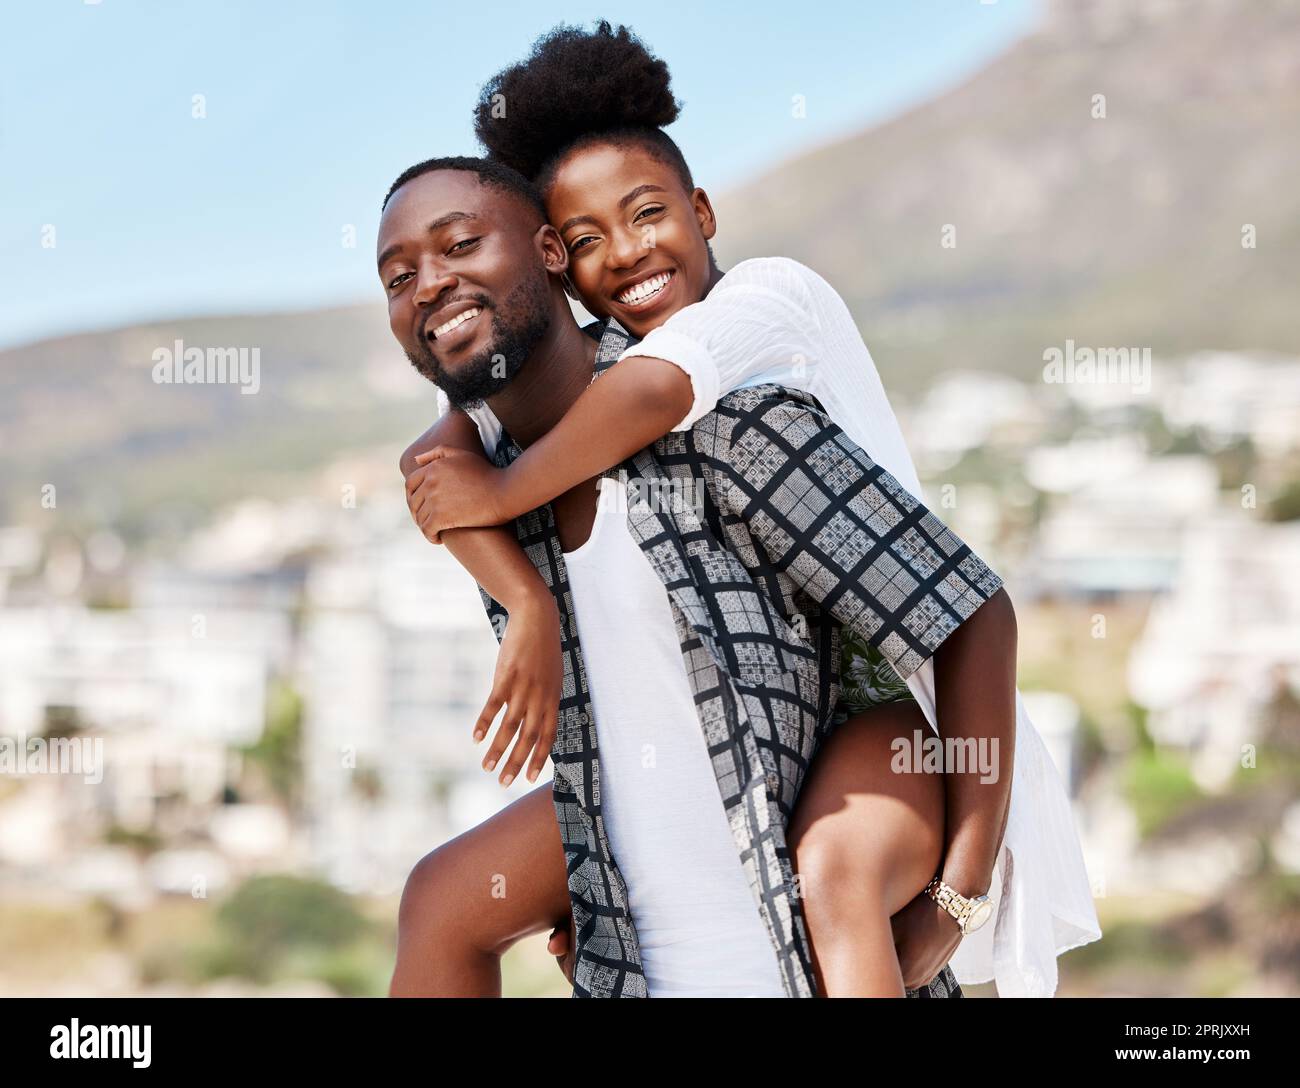 Portrait, black couple and back ride with a smile in nature outdoors on a date, trip or vacation. Love, romance and happy man and woman together with male carrying female on his shoulders outside. Stock Photo